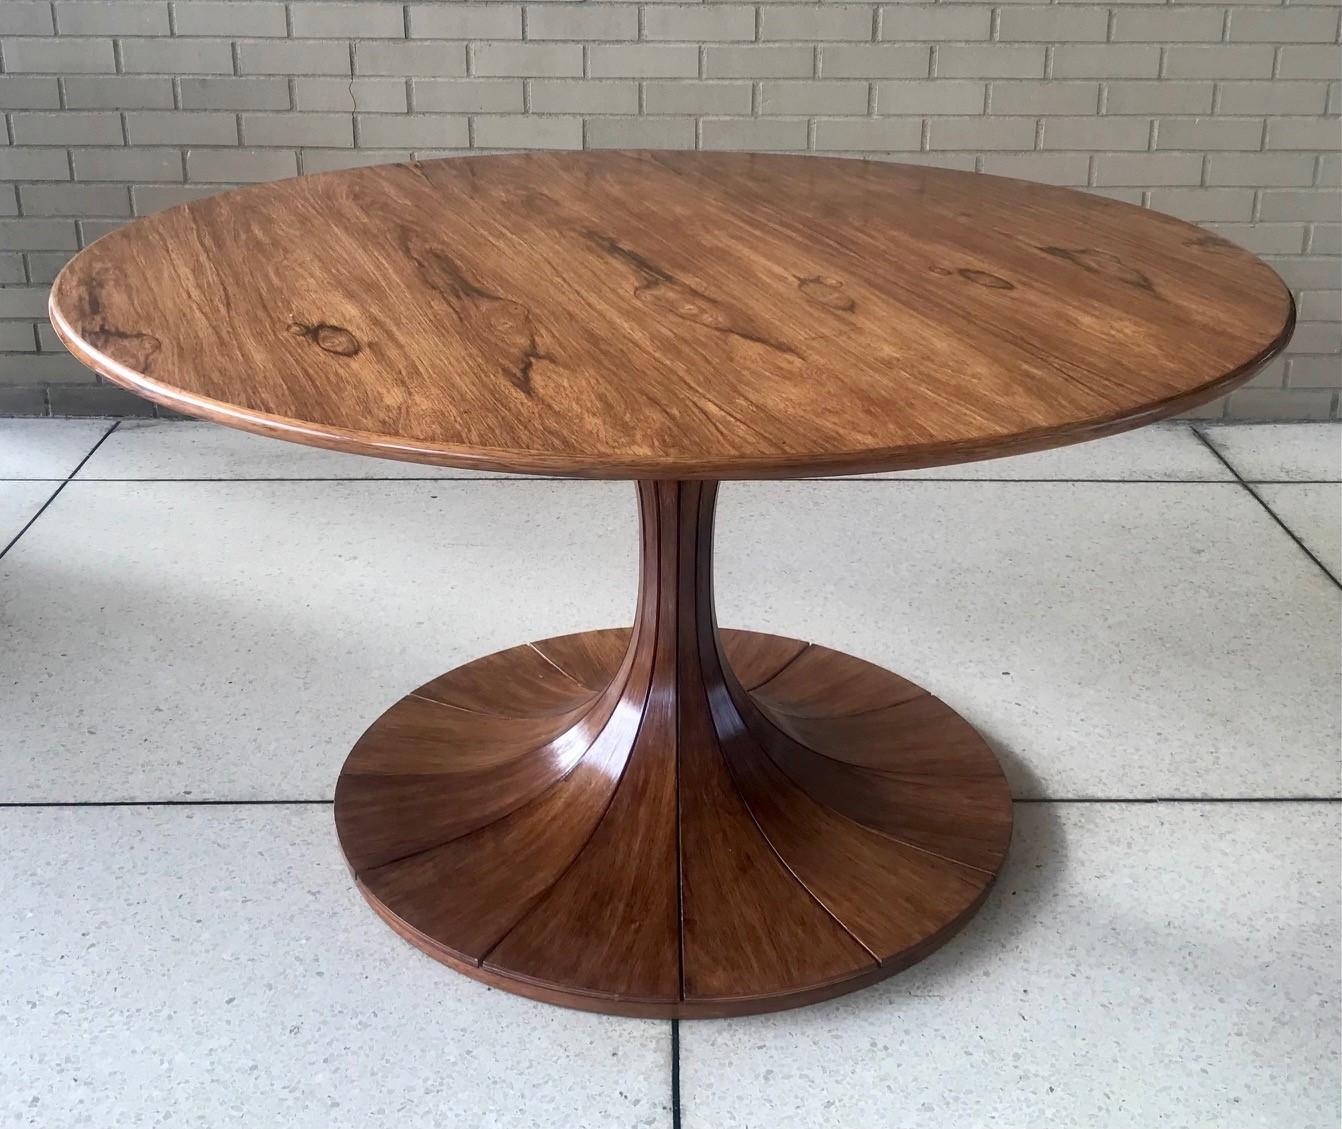 Luigi Massoni, one of the giants of Italian design, offers us this exquisitly figured dining or centre table. It looks great when solo in a space or with chairs around. This table has a number of variants, with different woods and pedestal shapes.